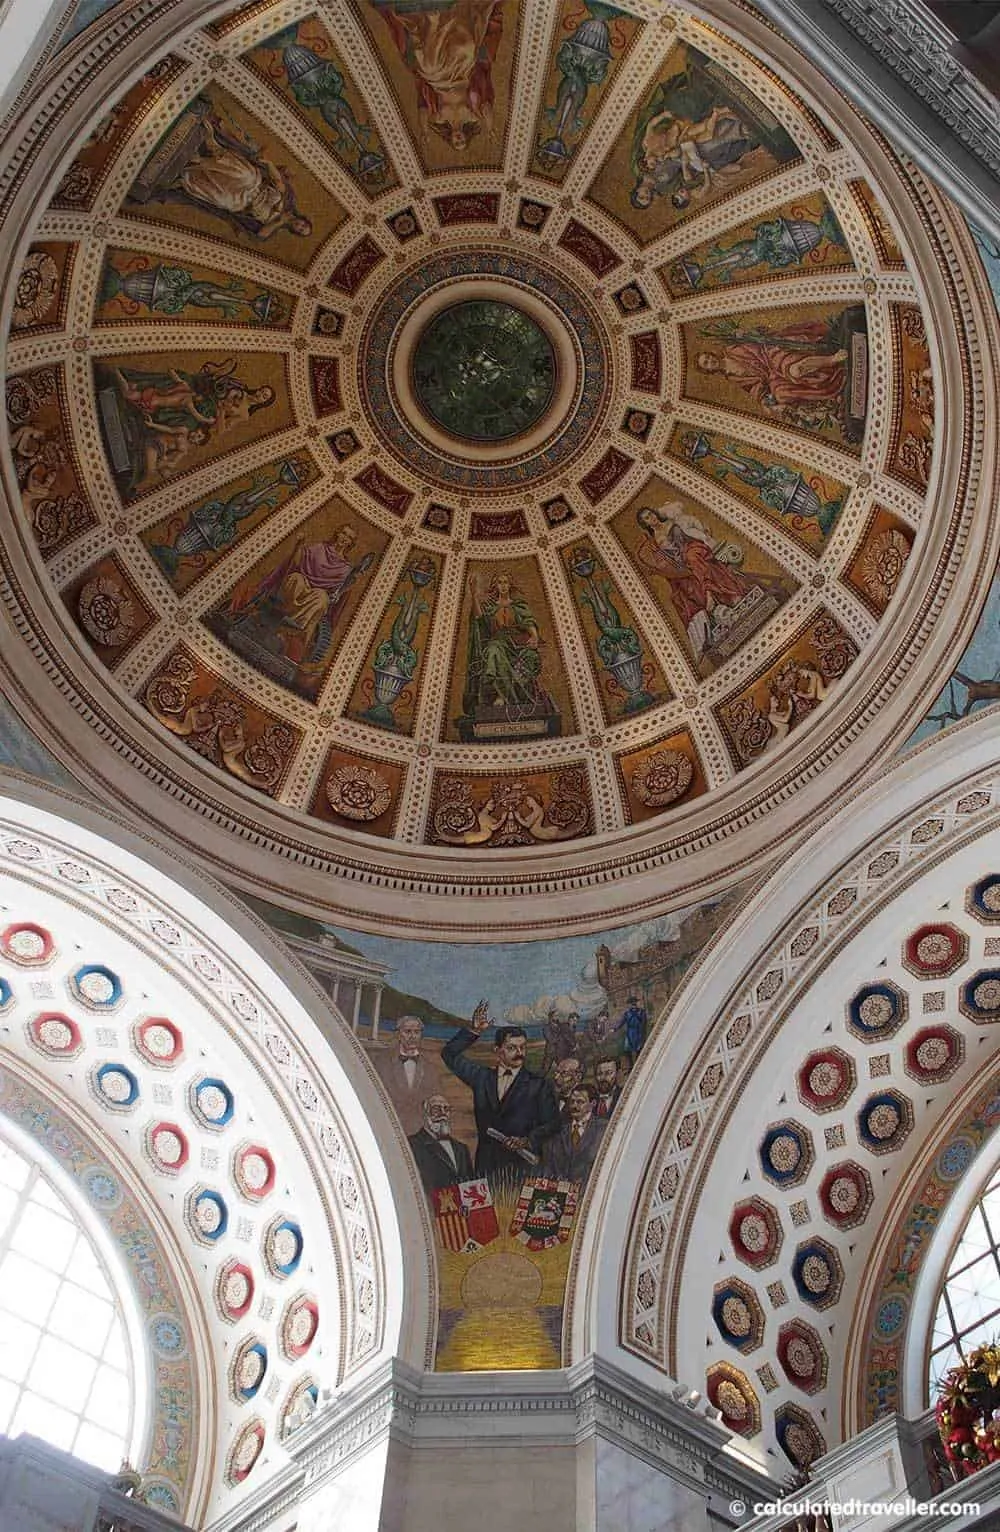 One Day Tour Itinerary for Old San Juan Puerto Rico by Calculated Traveller. Photo of the ceiling of the Capital Building. #SanJuan #PuertoRico #travel #Caribbean